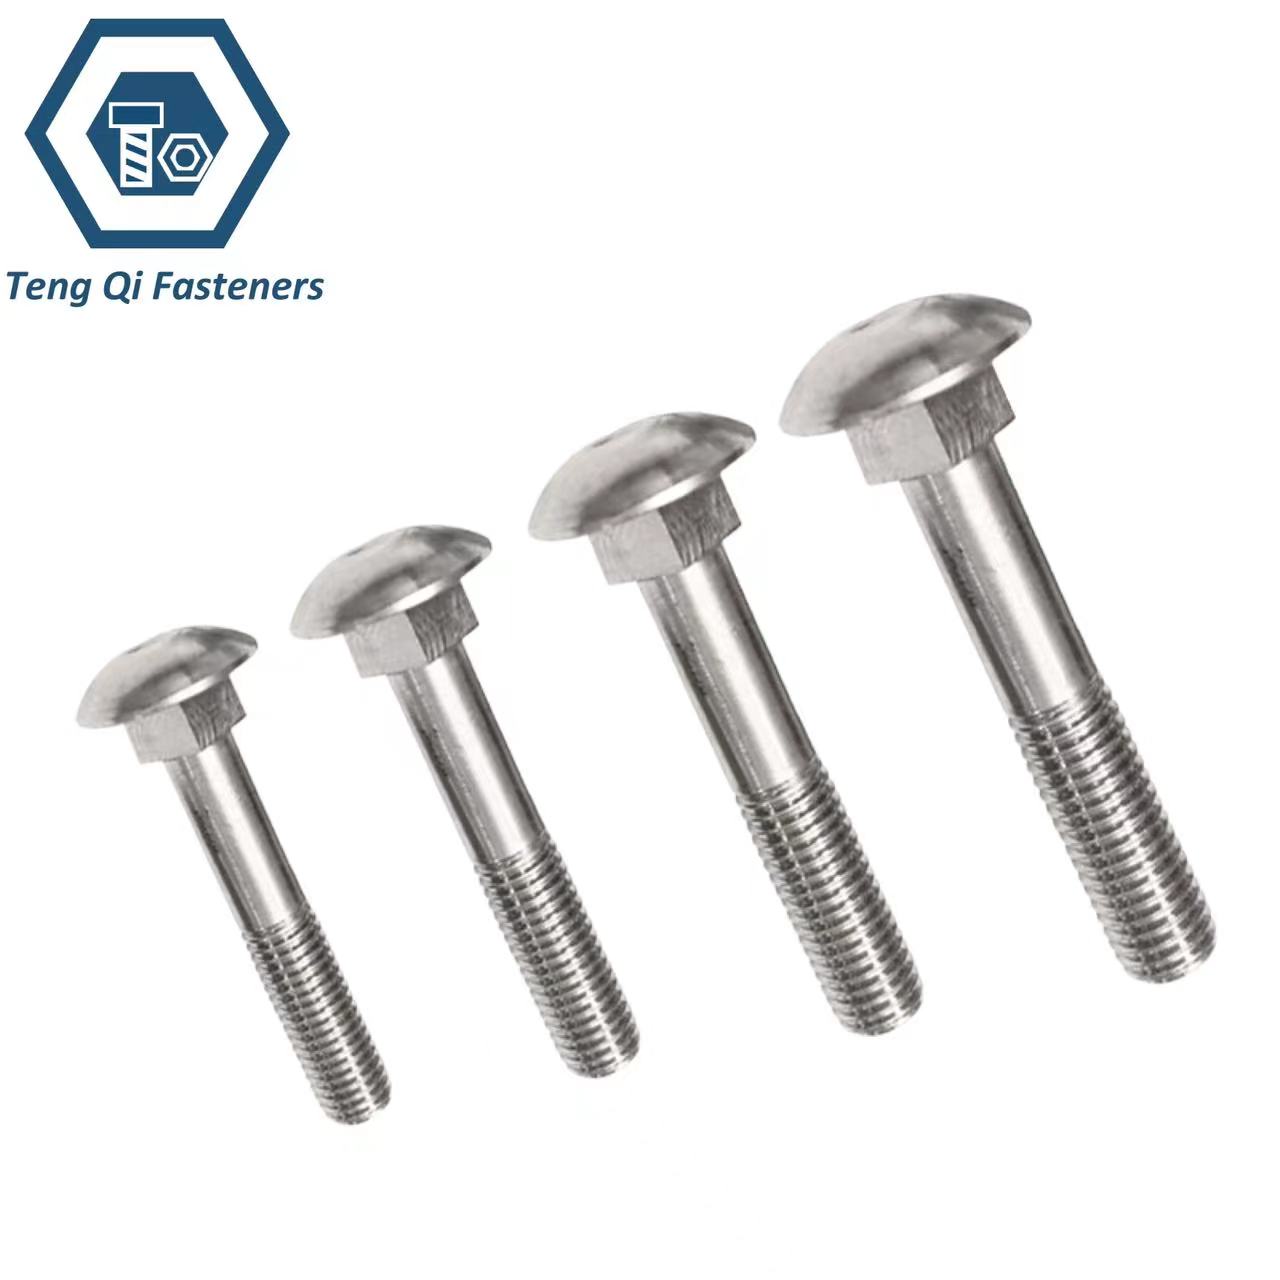 ASME ANSI B 18.5 American Standard Stainless Steel Partial Thread Round Head Square Neck Bolts